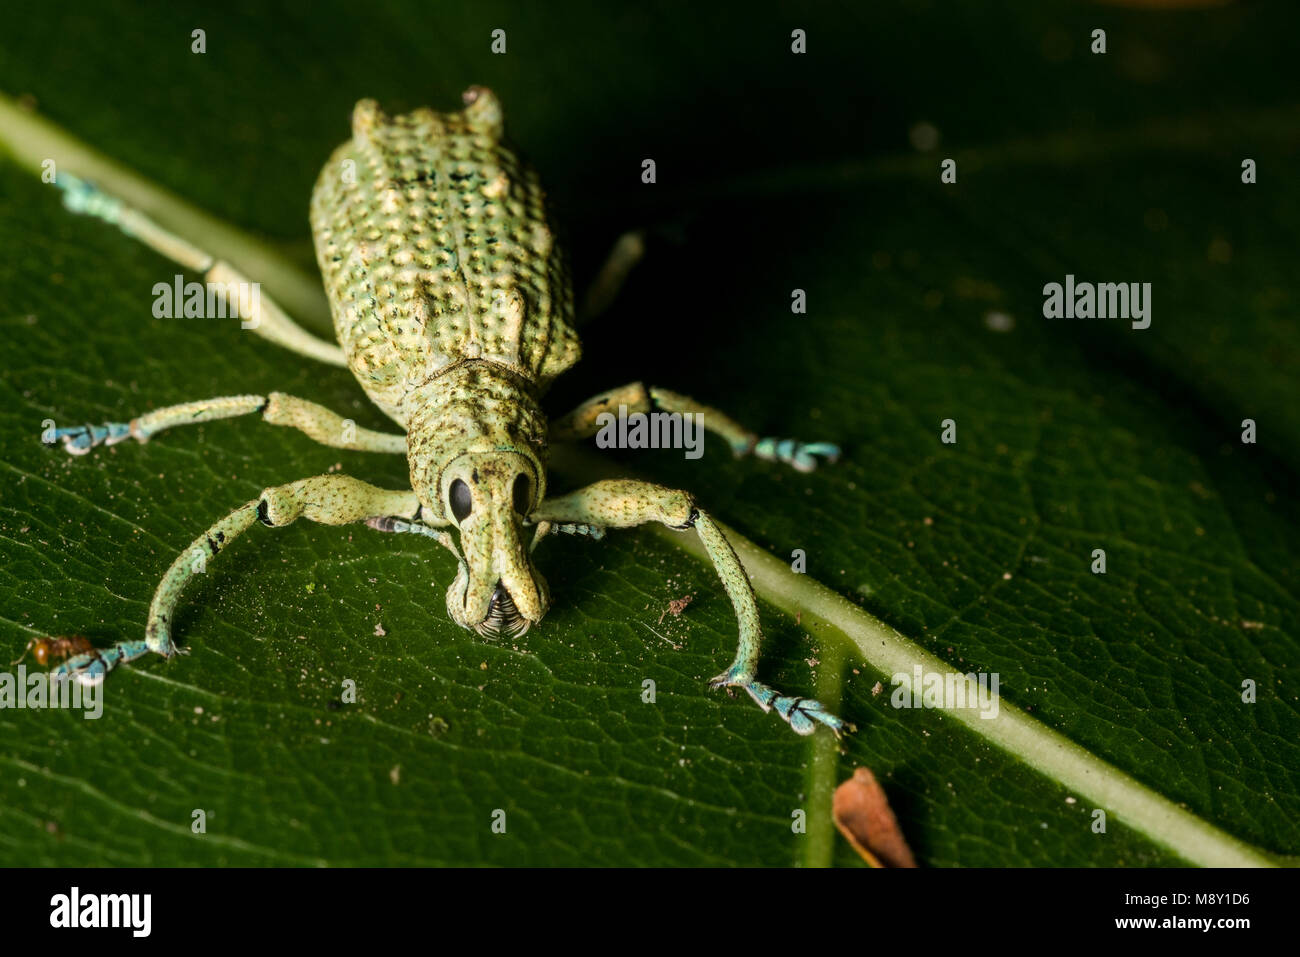 A green weevil from the Peruvian jungle Stock Photo